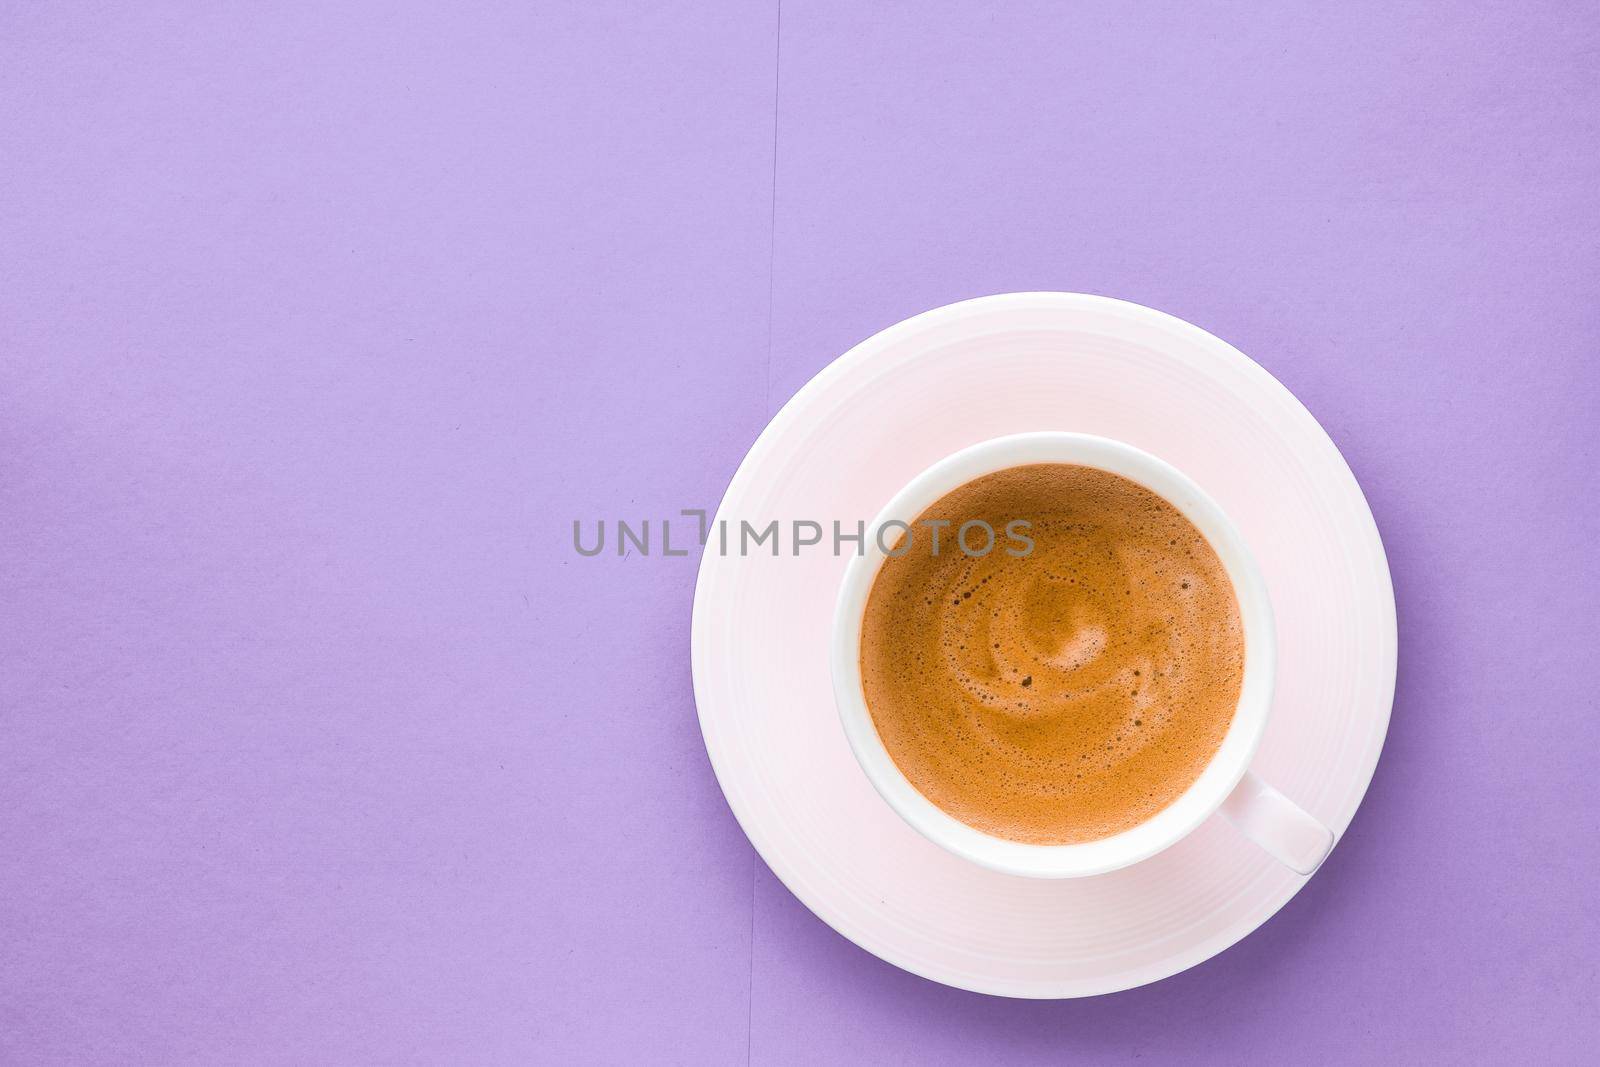 Breakfast, drinks and cafe menu concept - Coffee cup on purple background, top view flatlay